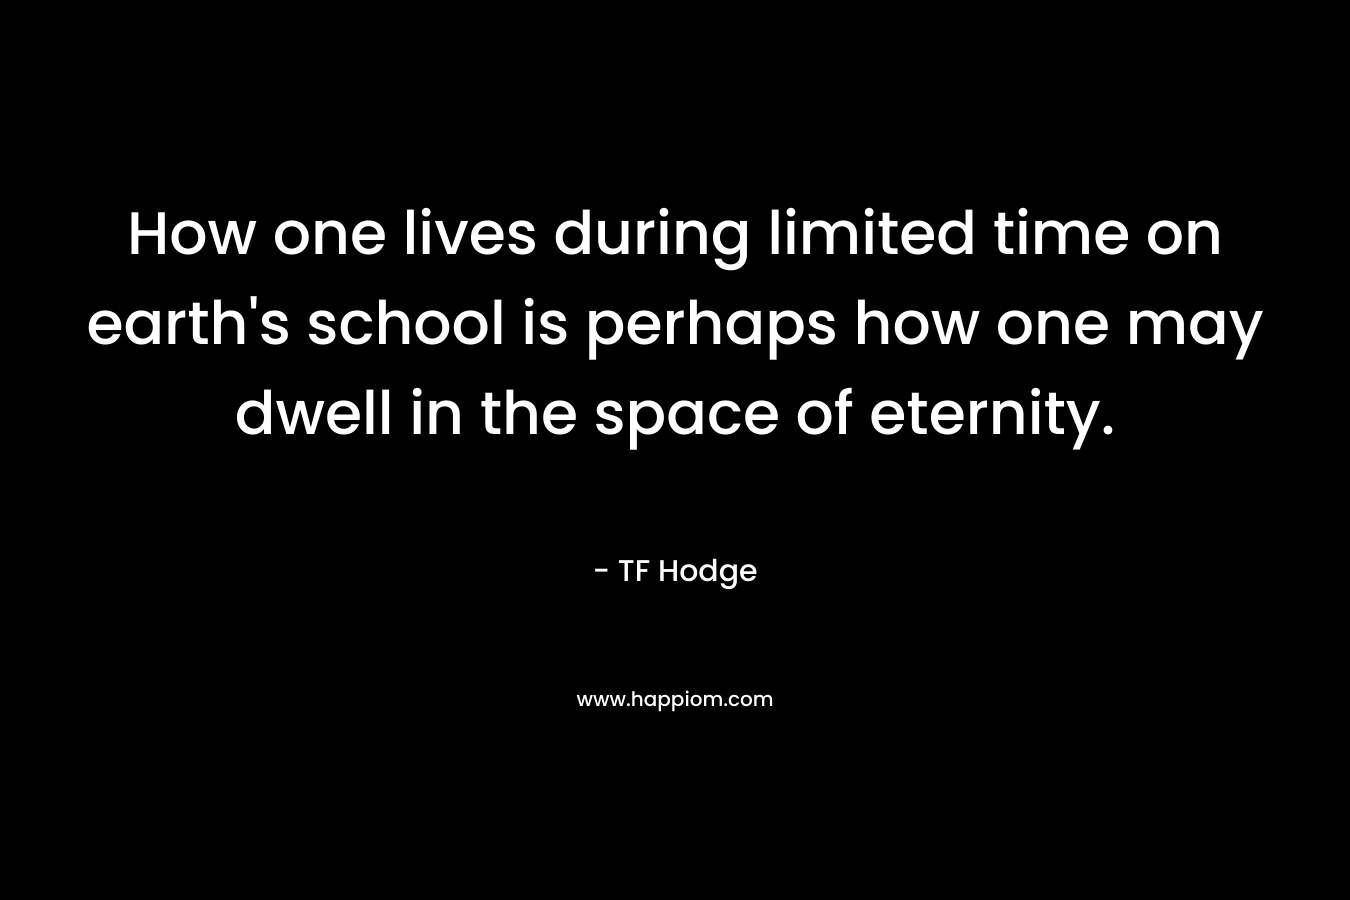 How one lives during limited time on earth’s school is perhaps how one may dwell in the space of eternity. – TF Hodge